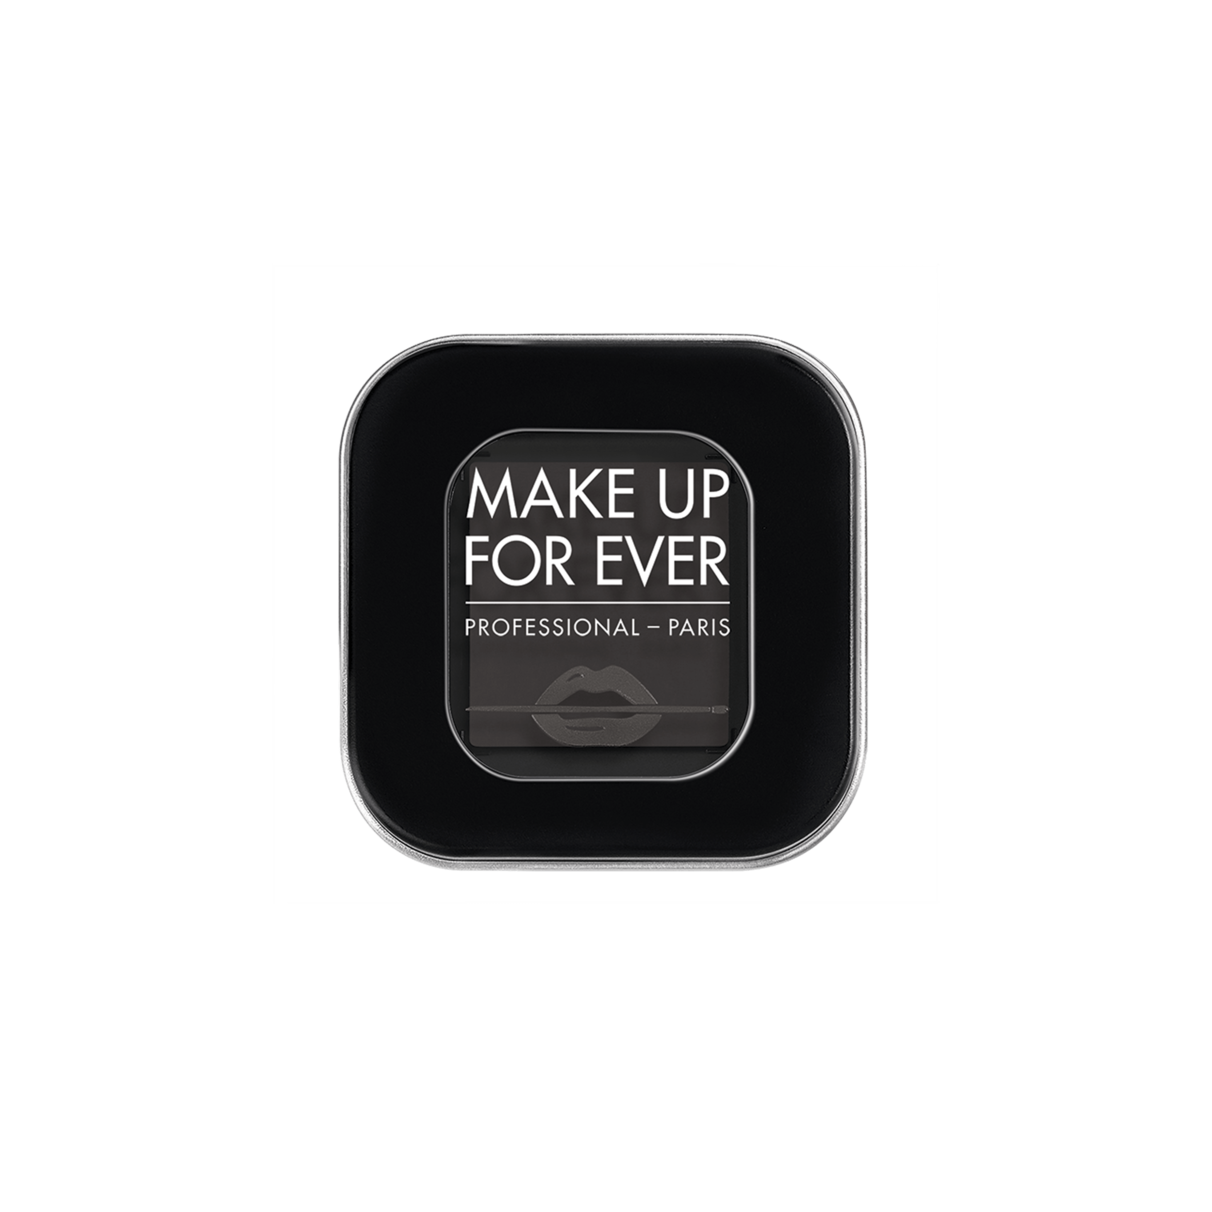 Make Up For Ever Refillable Makeup Palette | Camera Ready Cosmetics